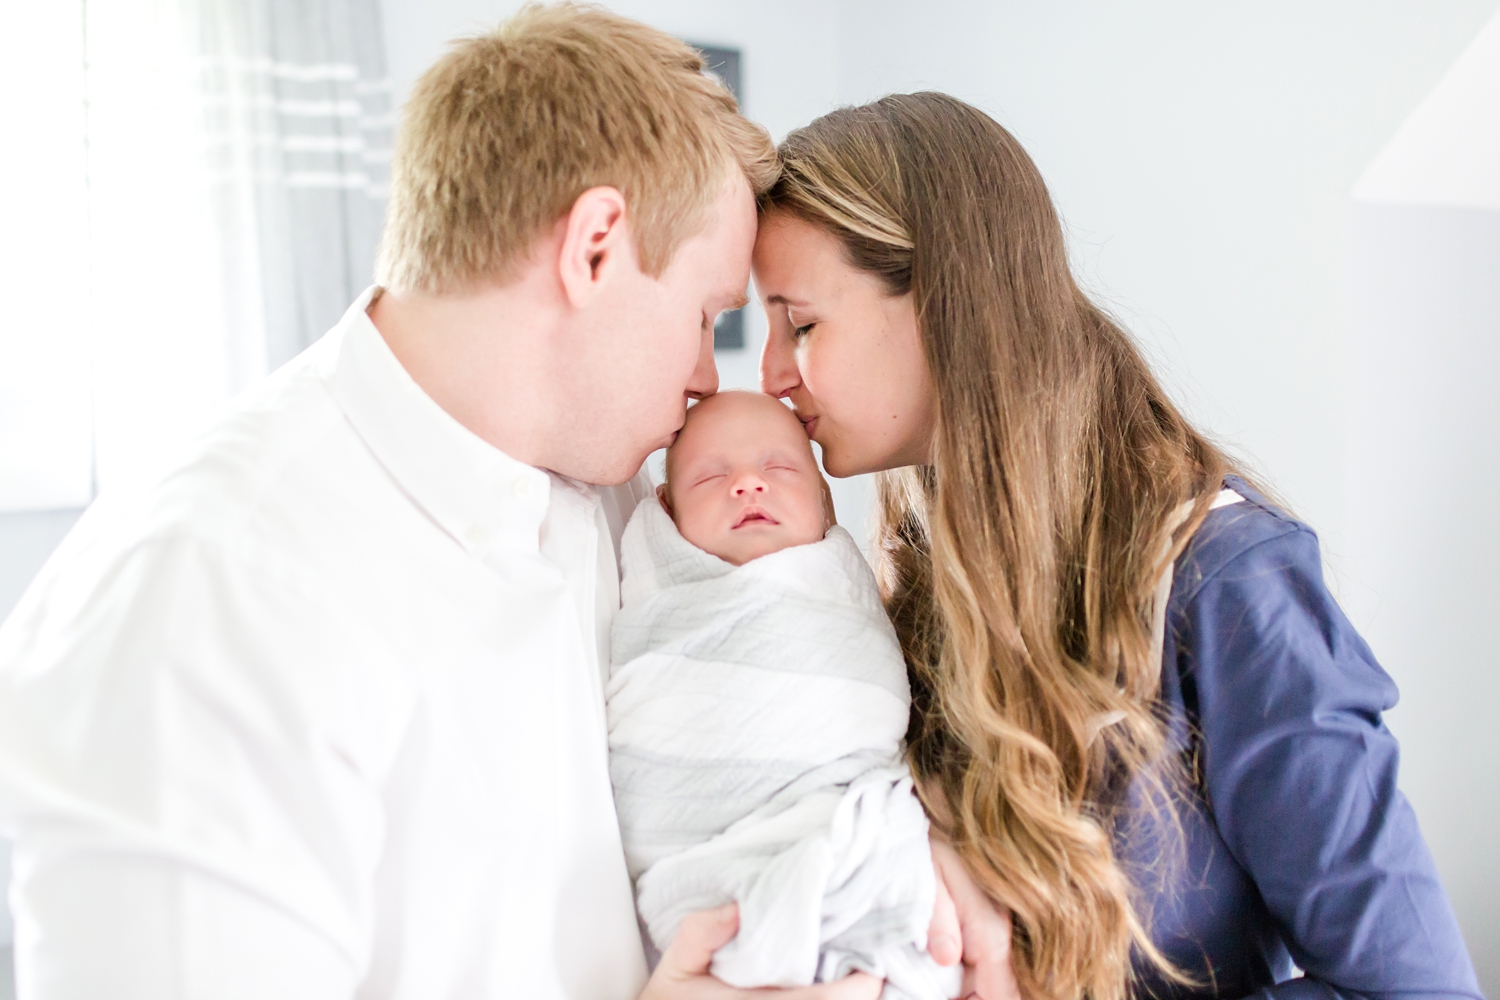  See more from   baby Steele’s newborn session here  !  